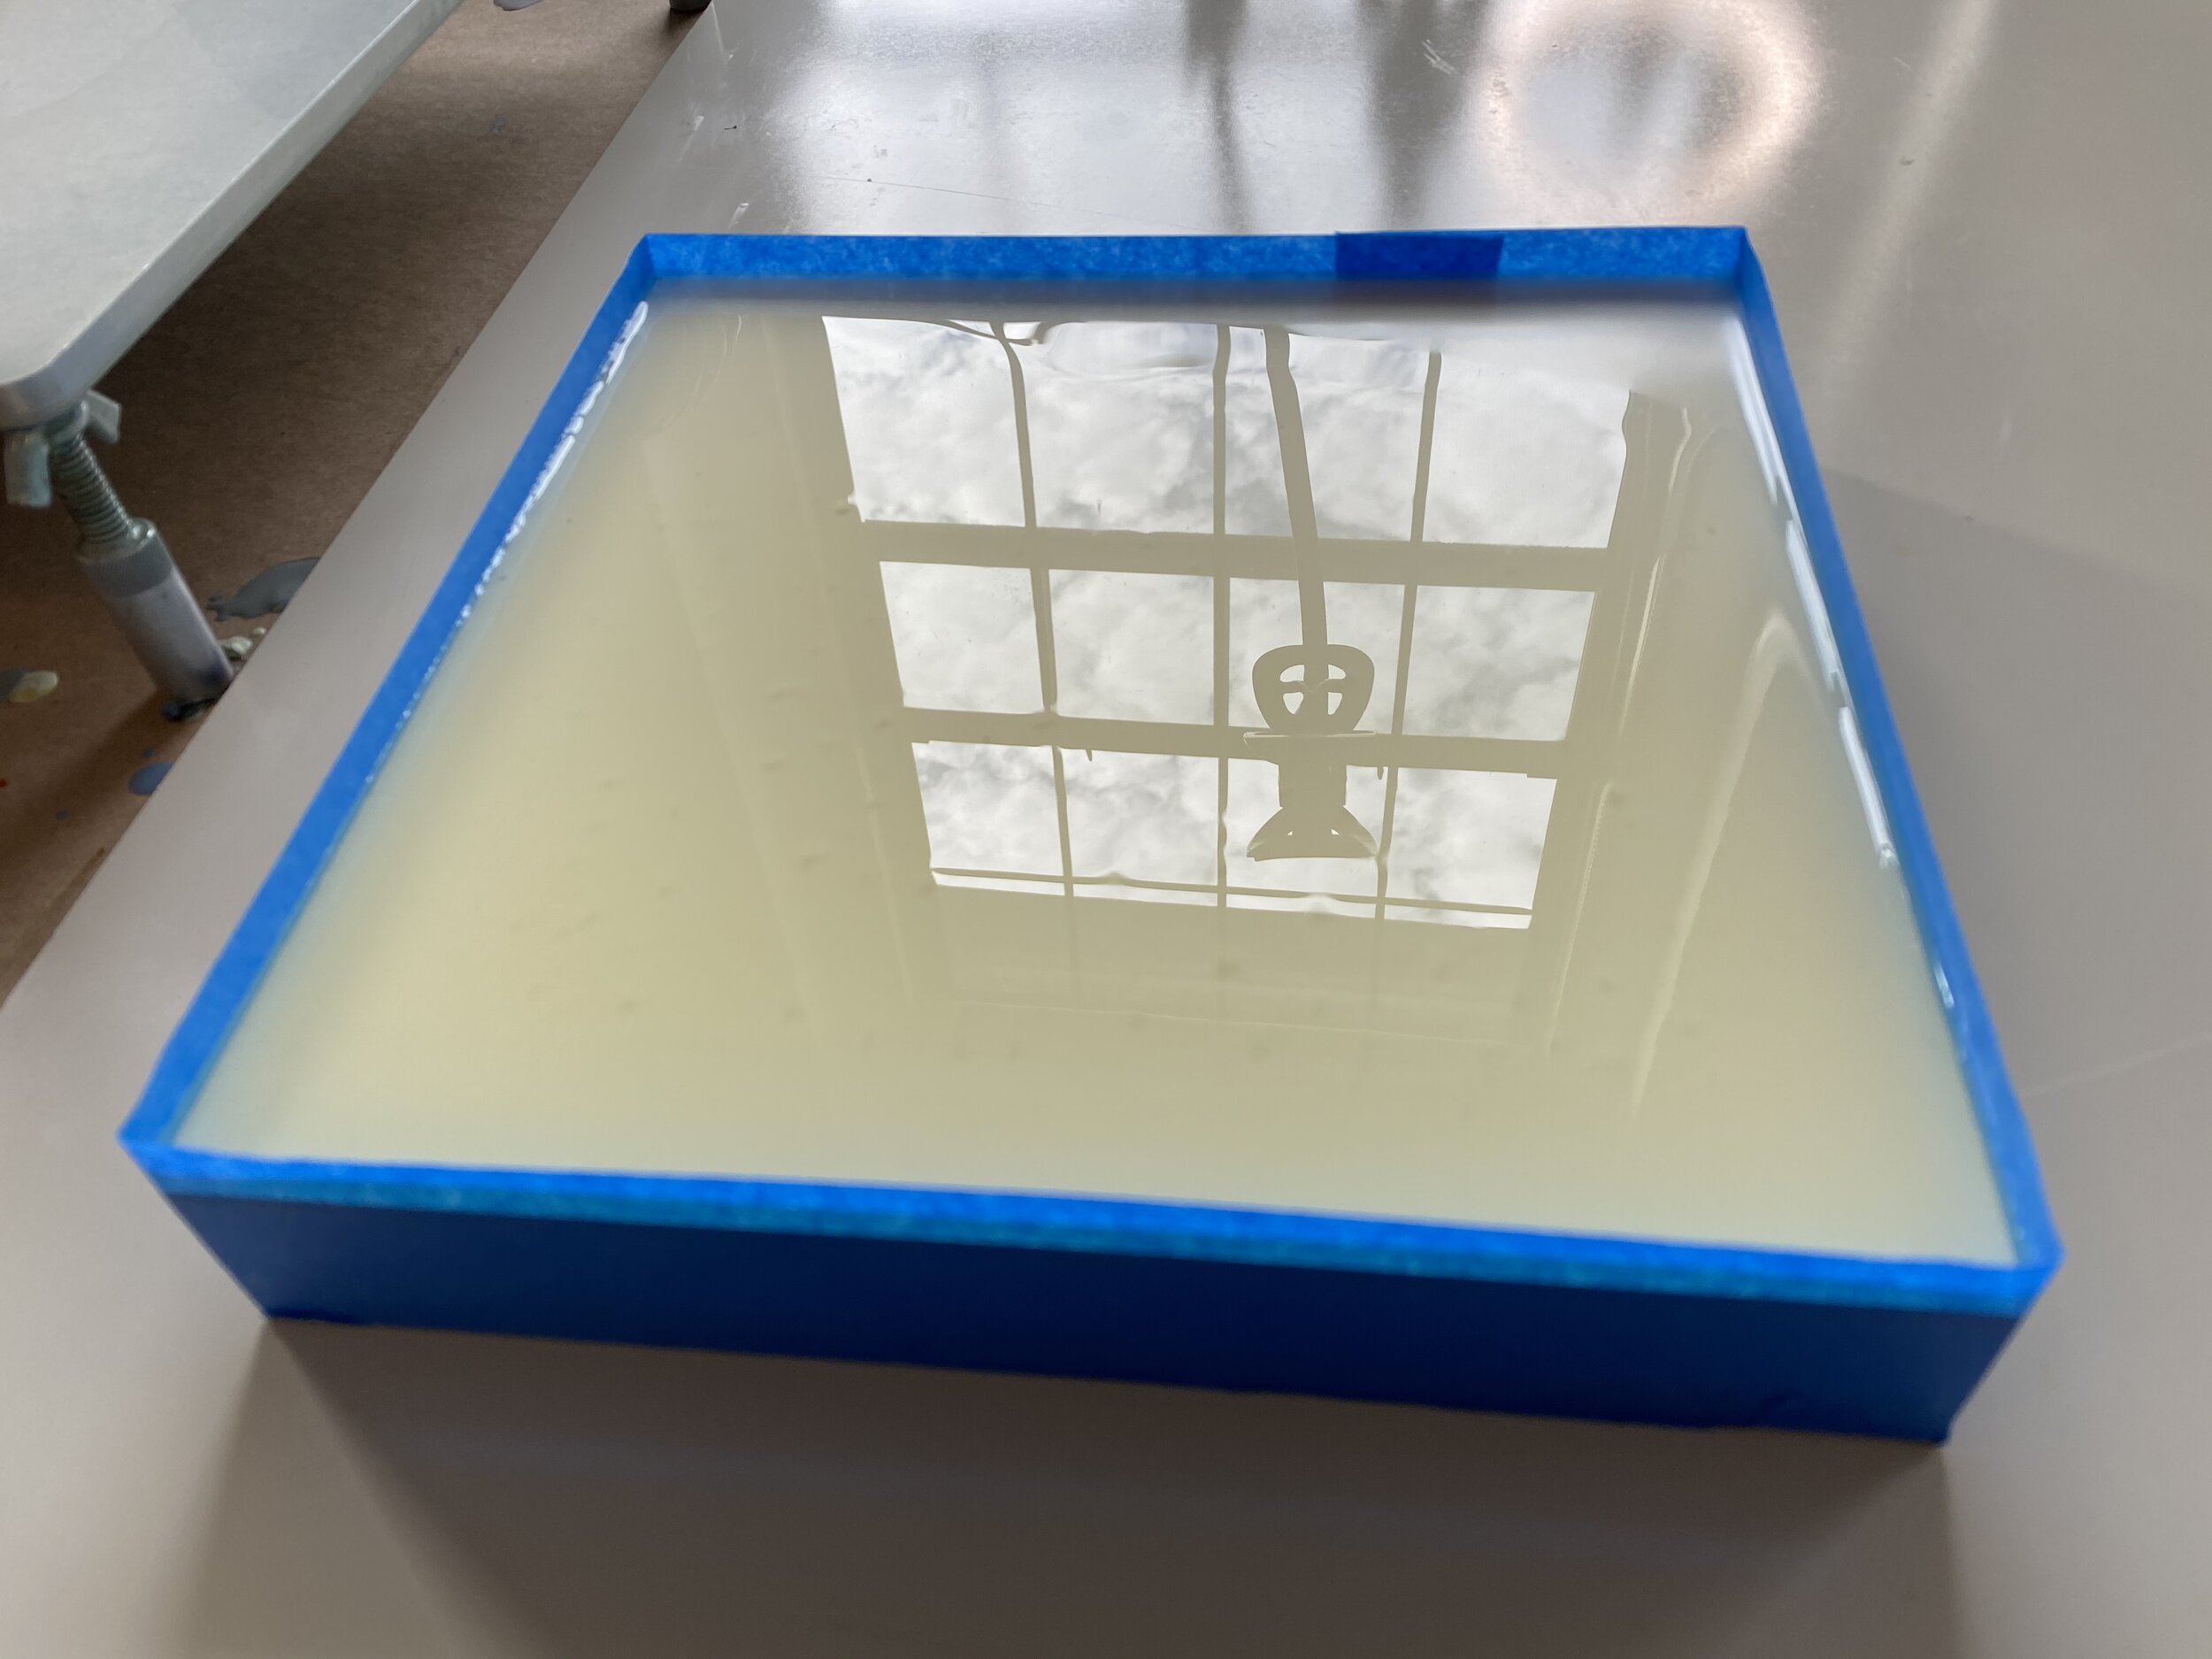 Acrylic Pinched Corner Tray - Small